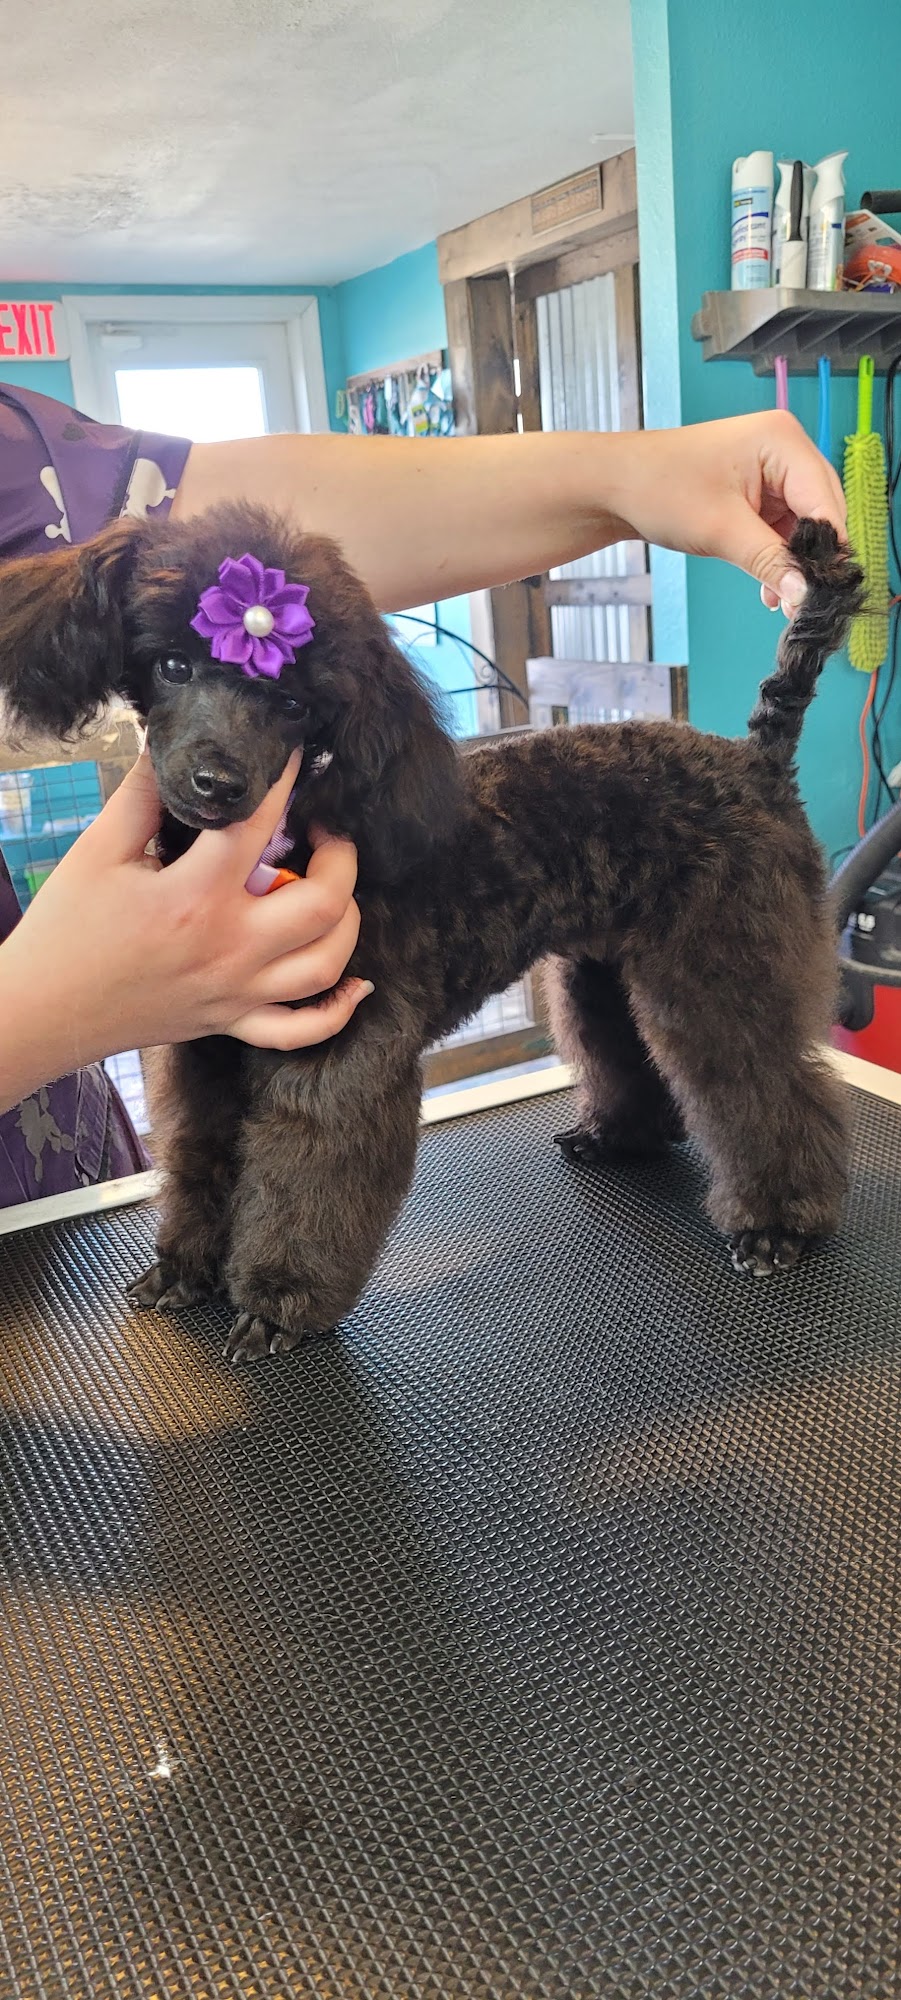 Heads N Tails Pet Grooming 105 Frizzell St, Potosi Missouri 63664